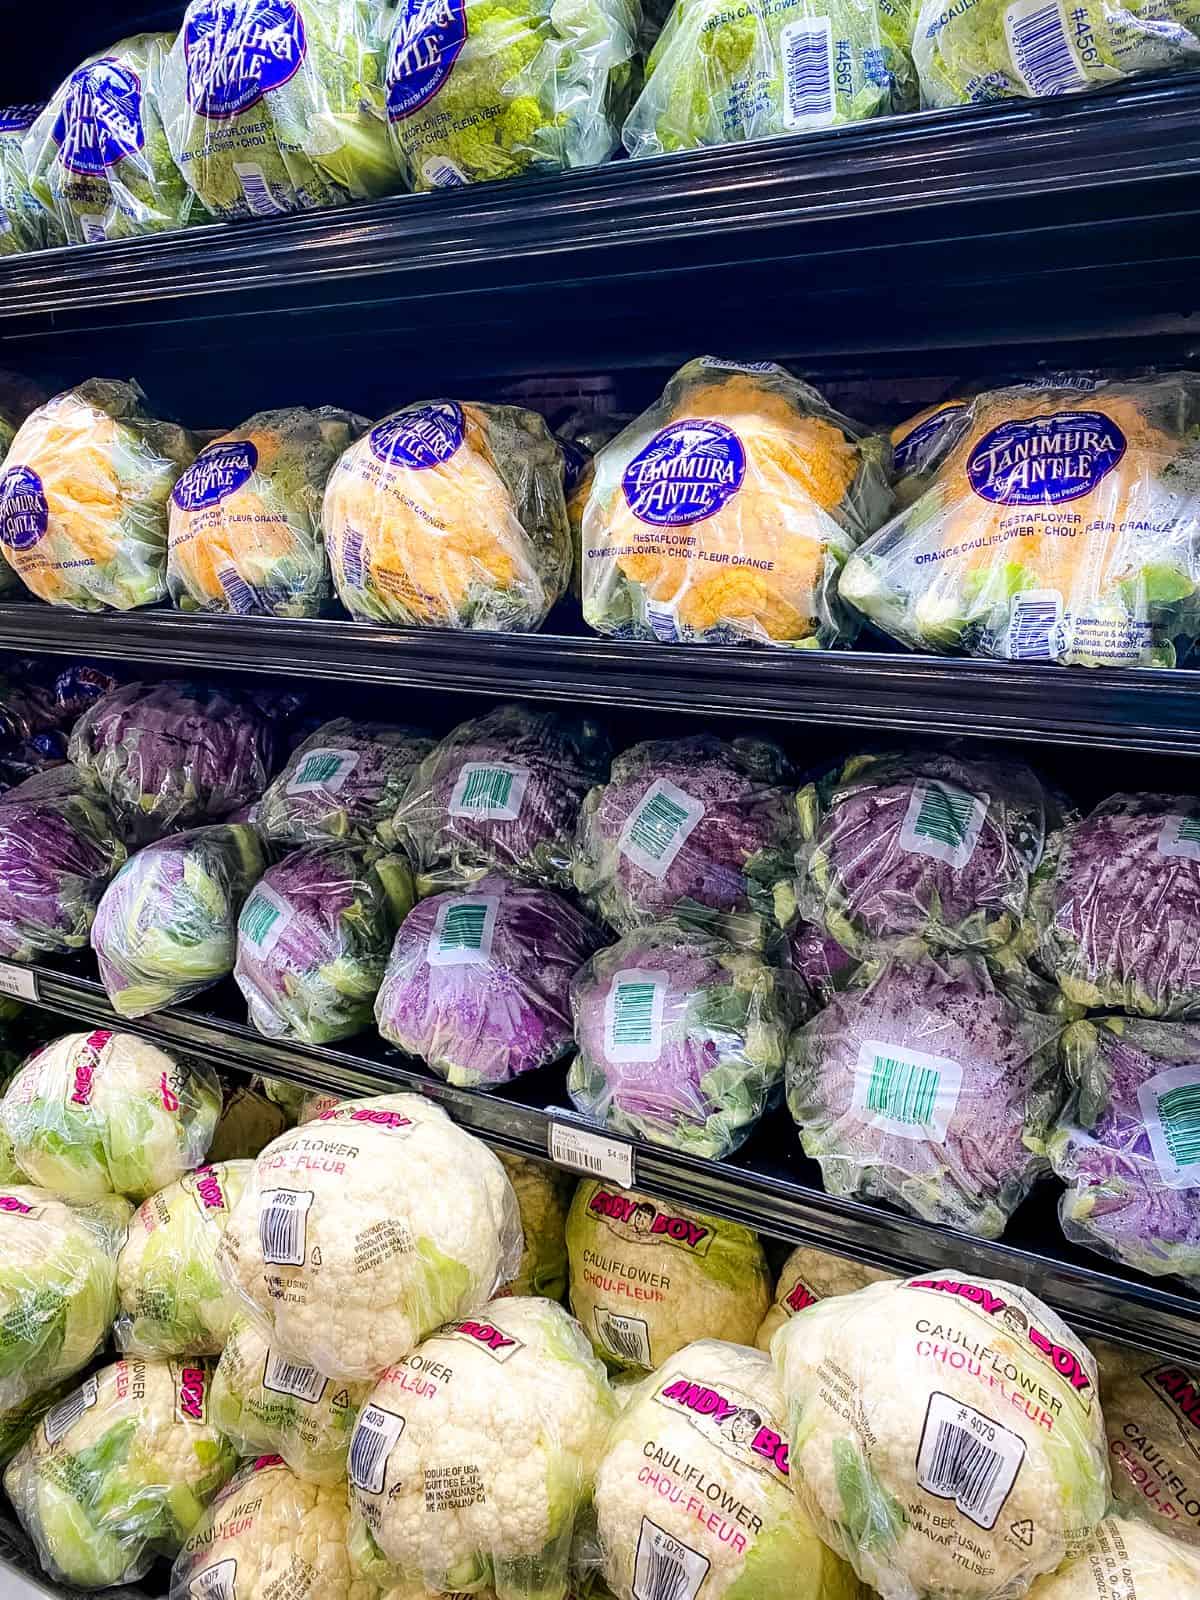 Cauliflower in packages on shelves.